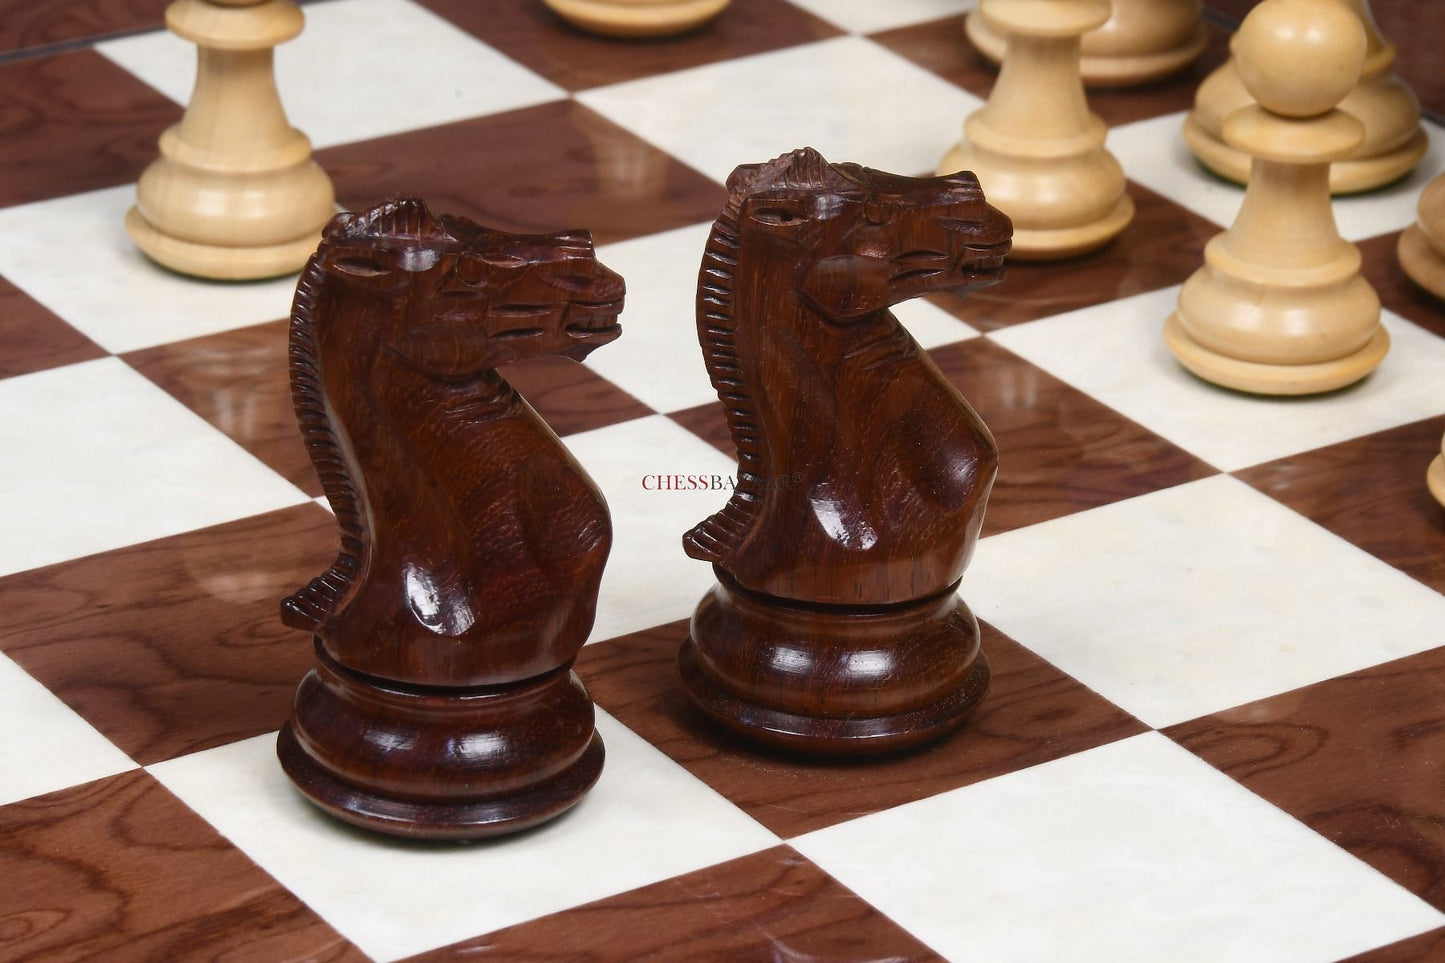 The Honour of Staunton (HOS) Series Weighted Chess Pieces in Bud Rose Wood & Box Wood - 4.0" King